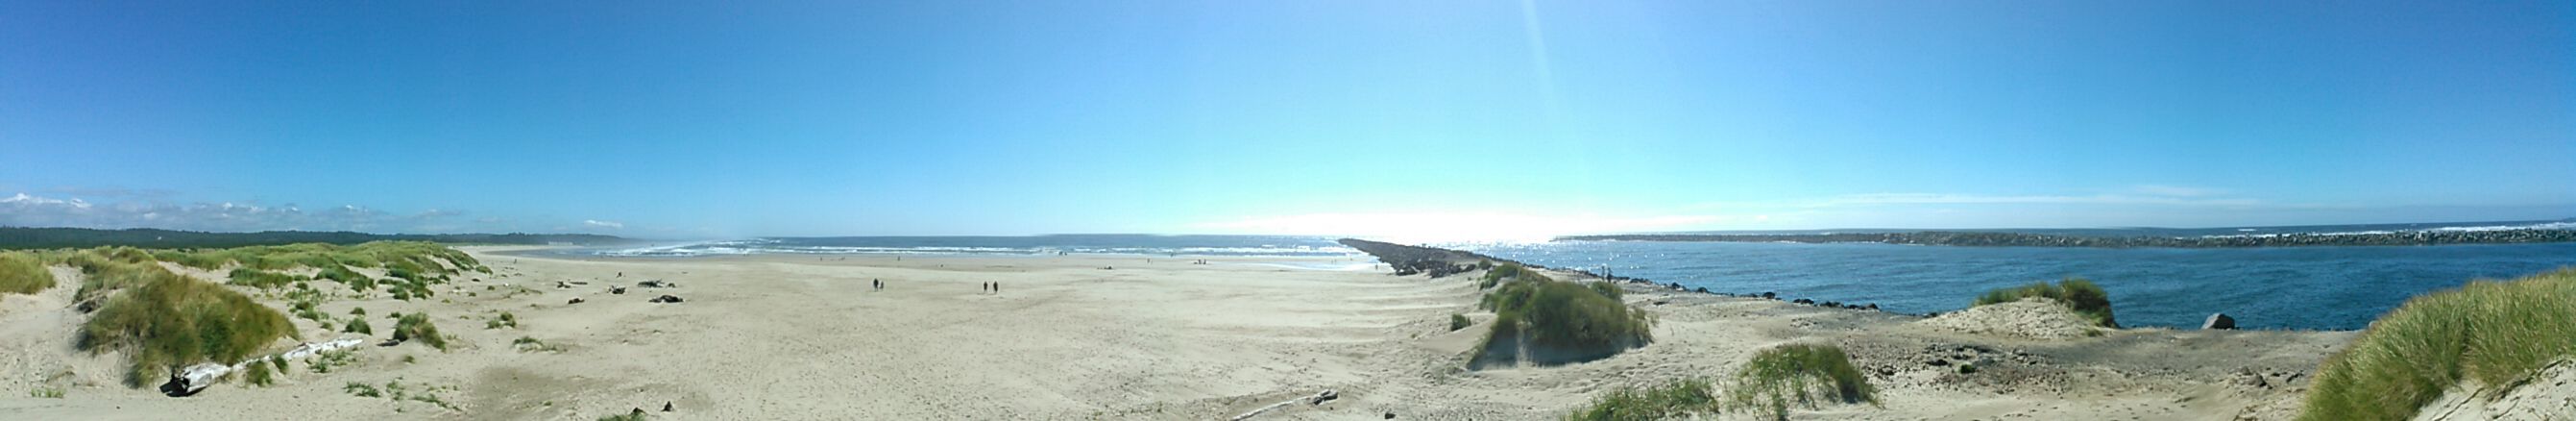 Panorama view of the North and South jetties at the Yaquina Bay inlet, Newport, OR